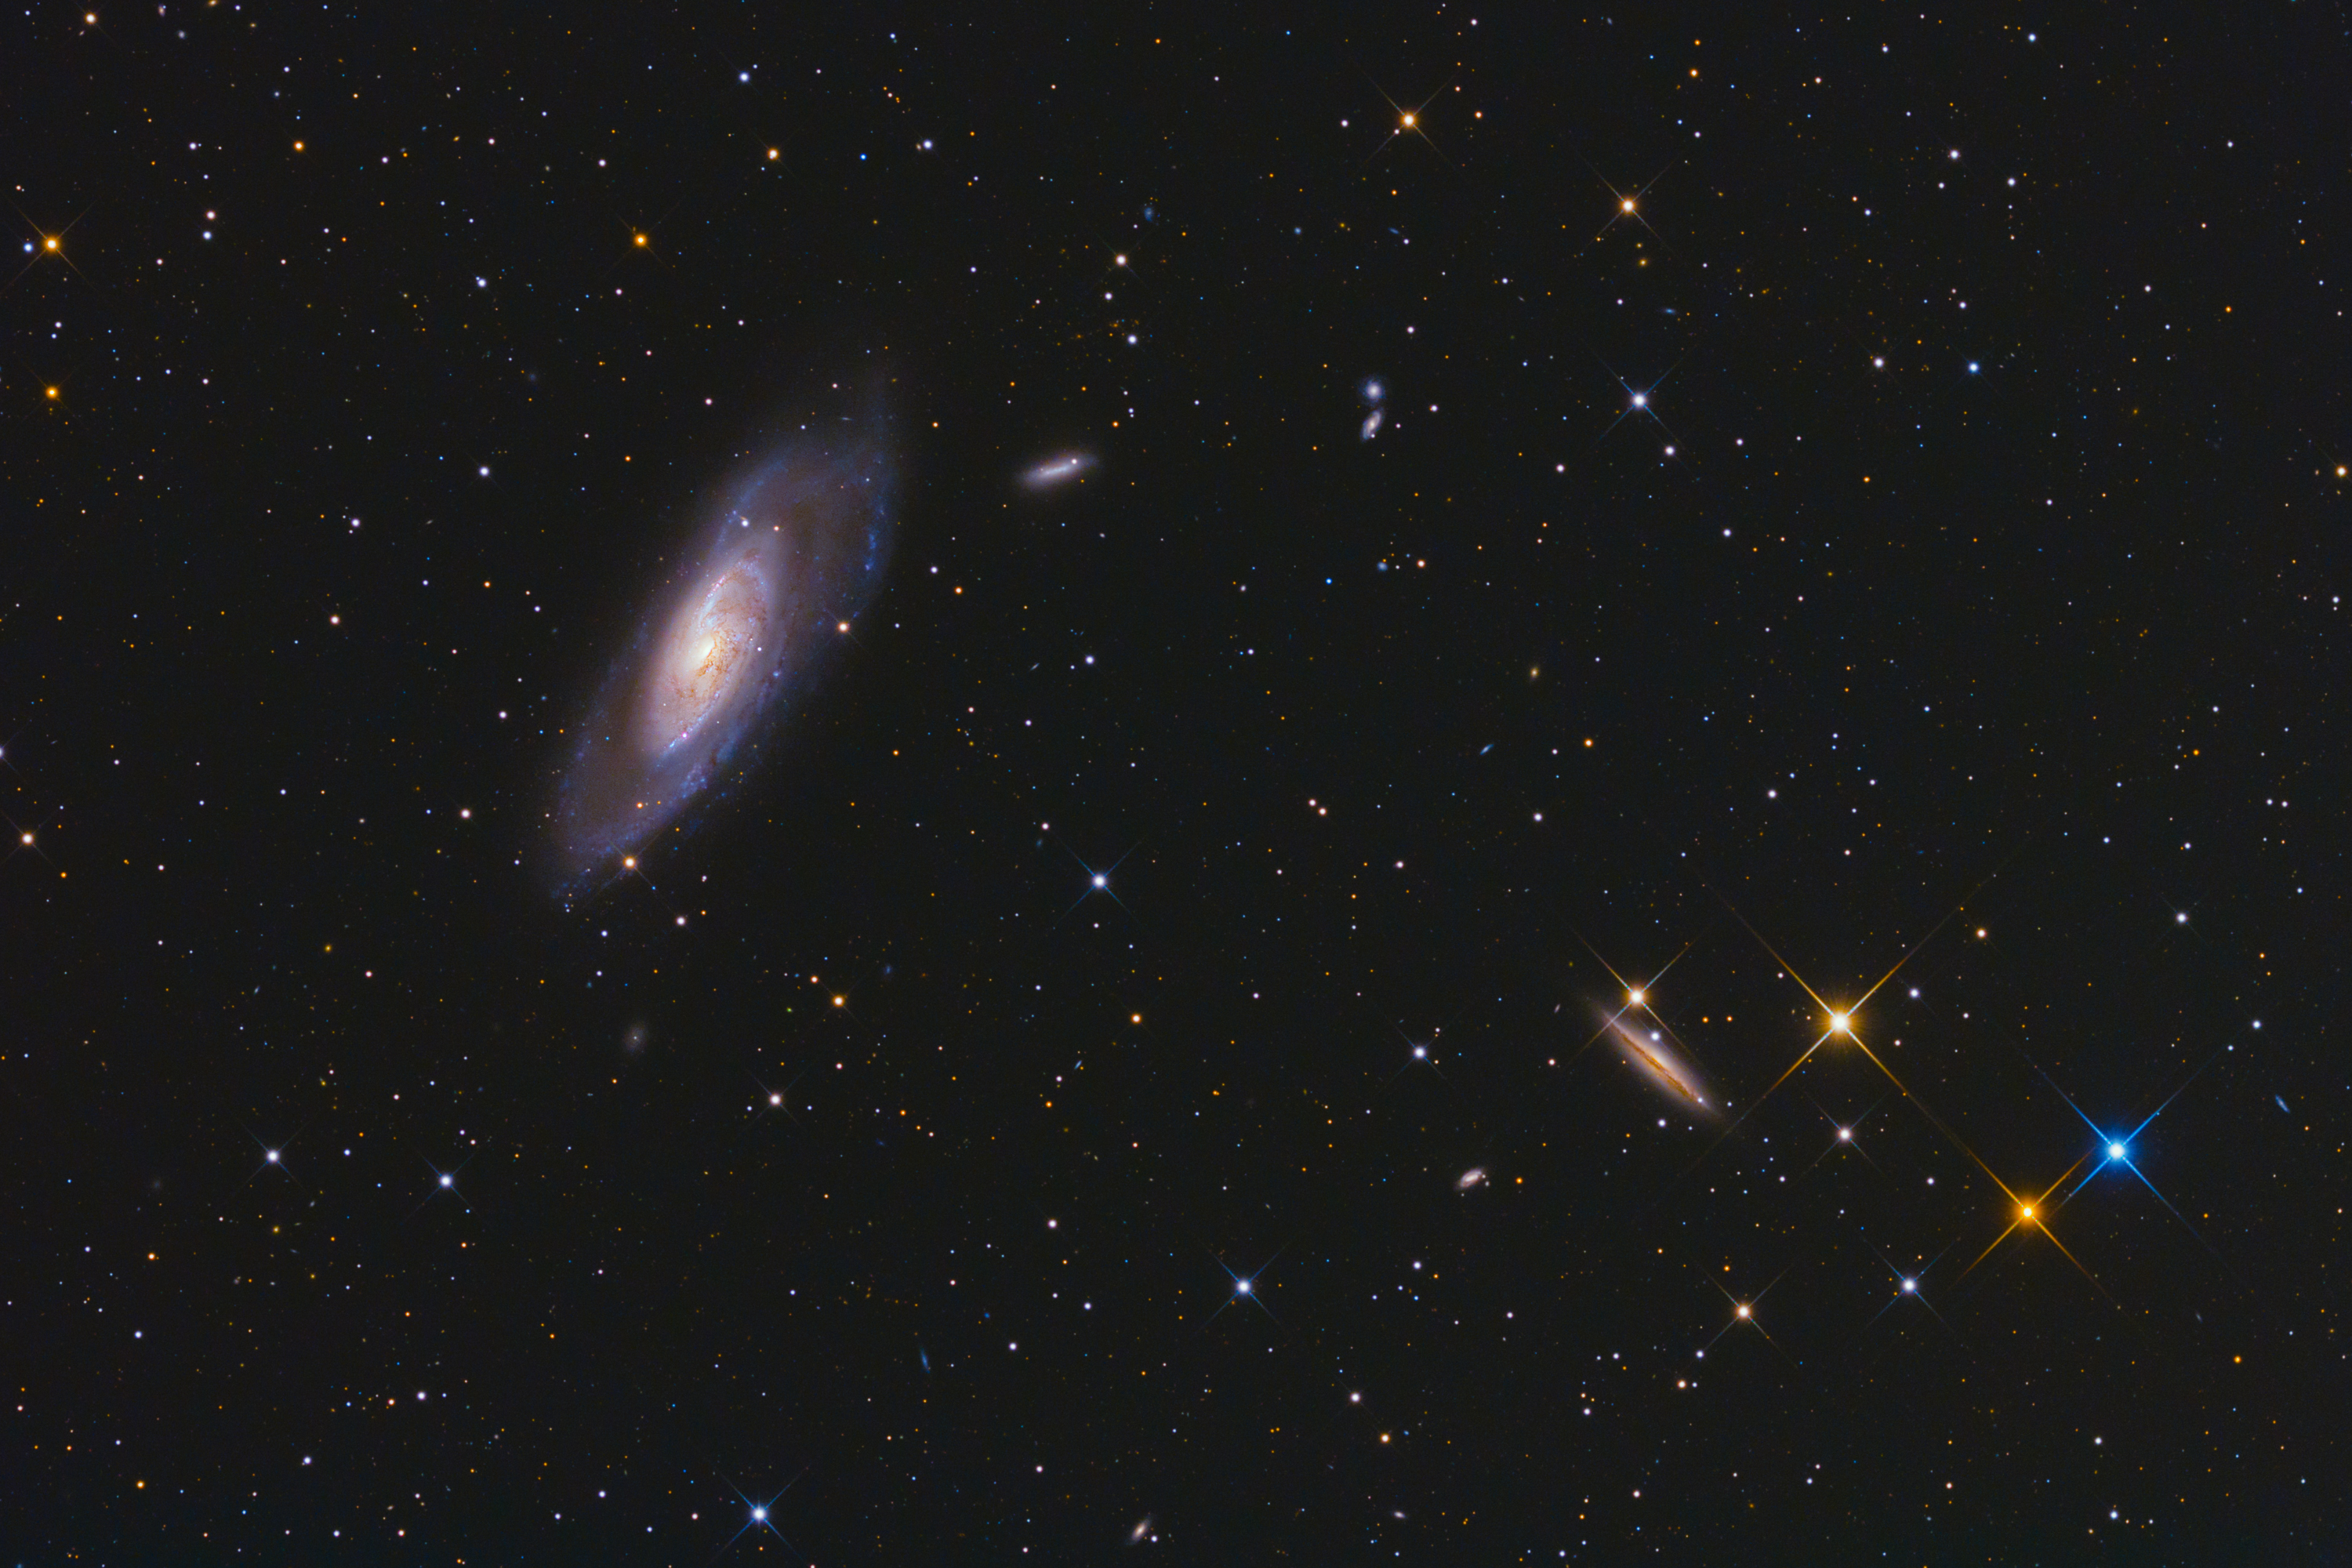 M106_ORG_4and5_Mix23.jpg